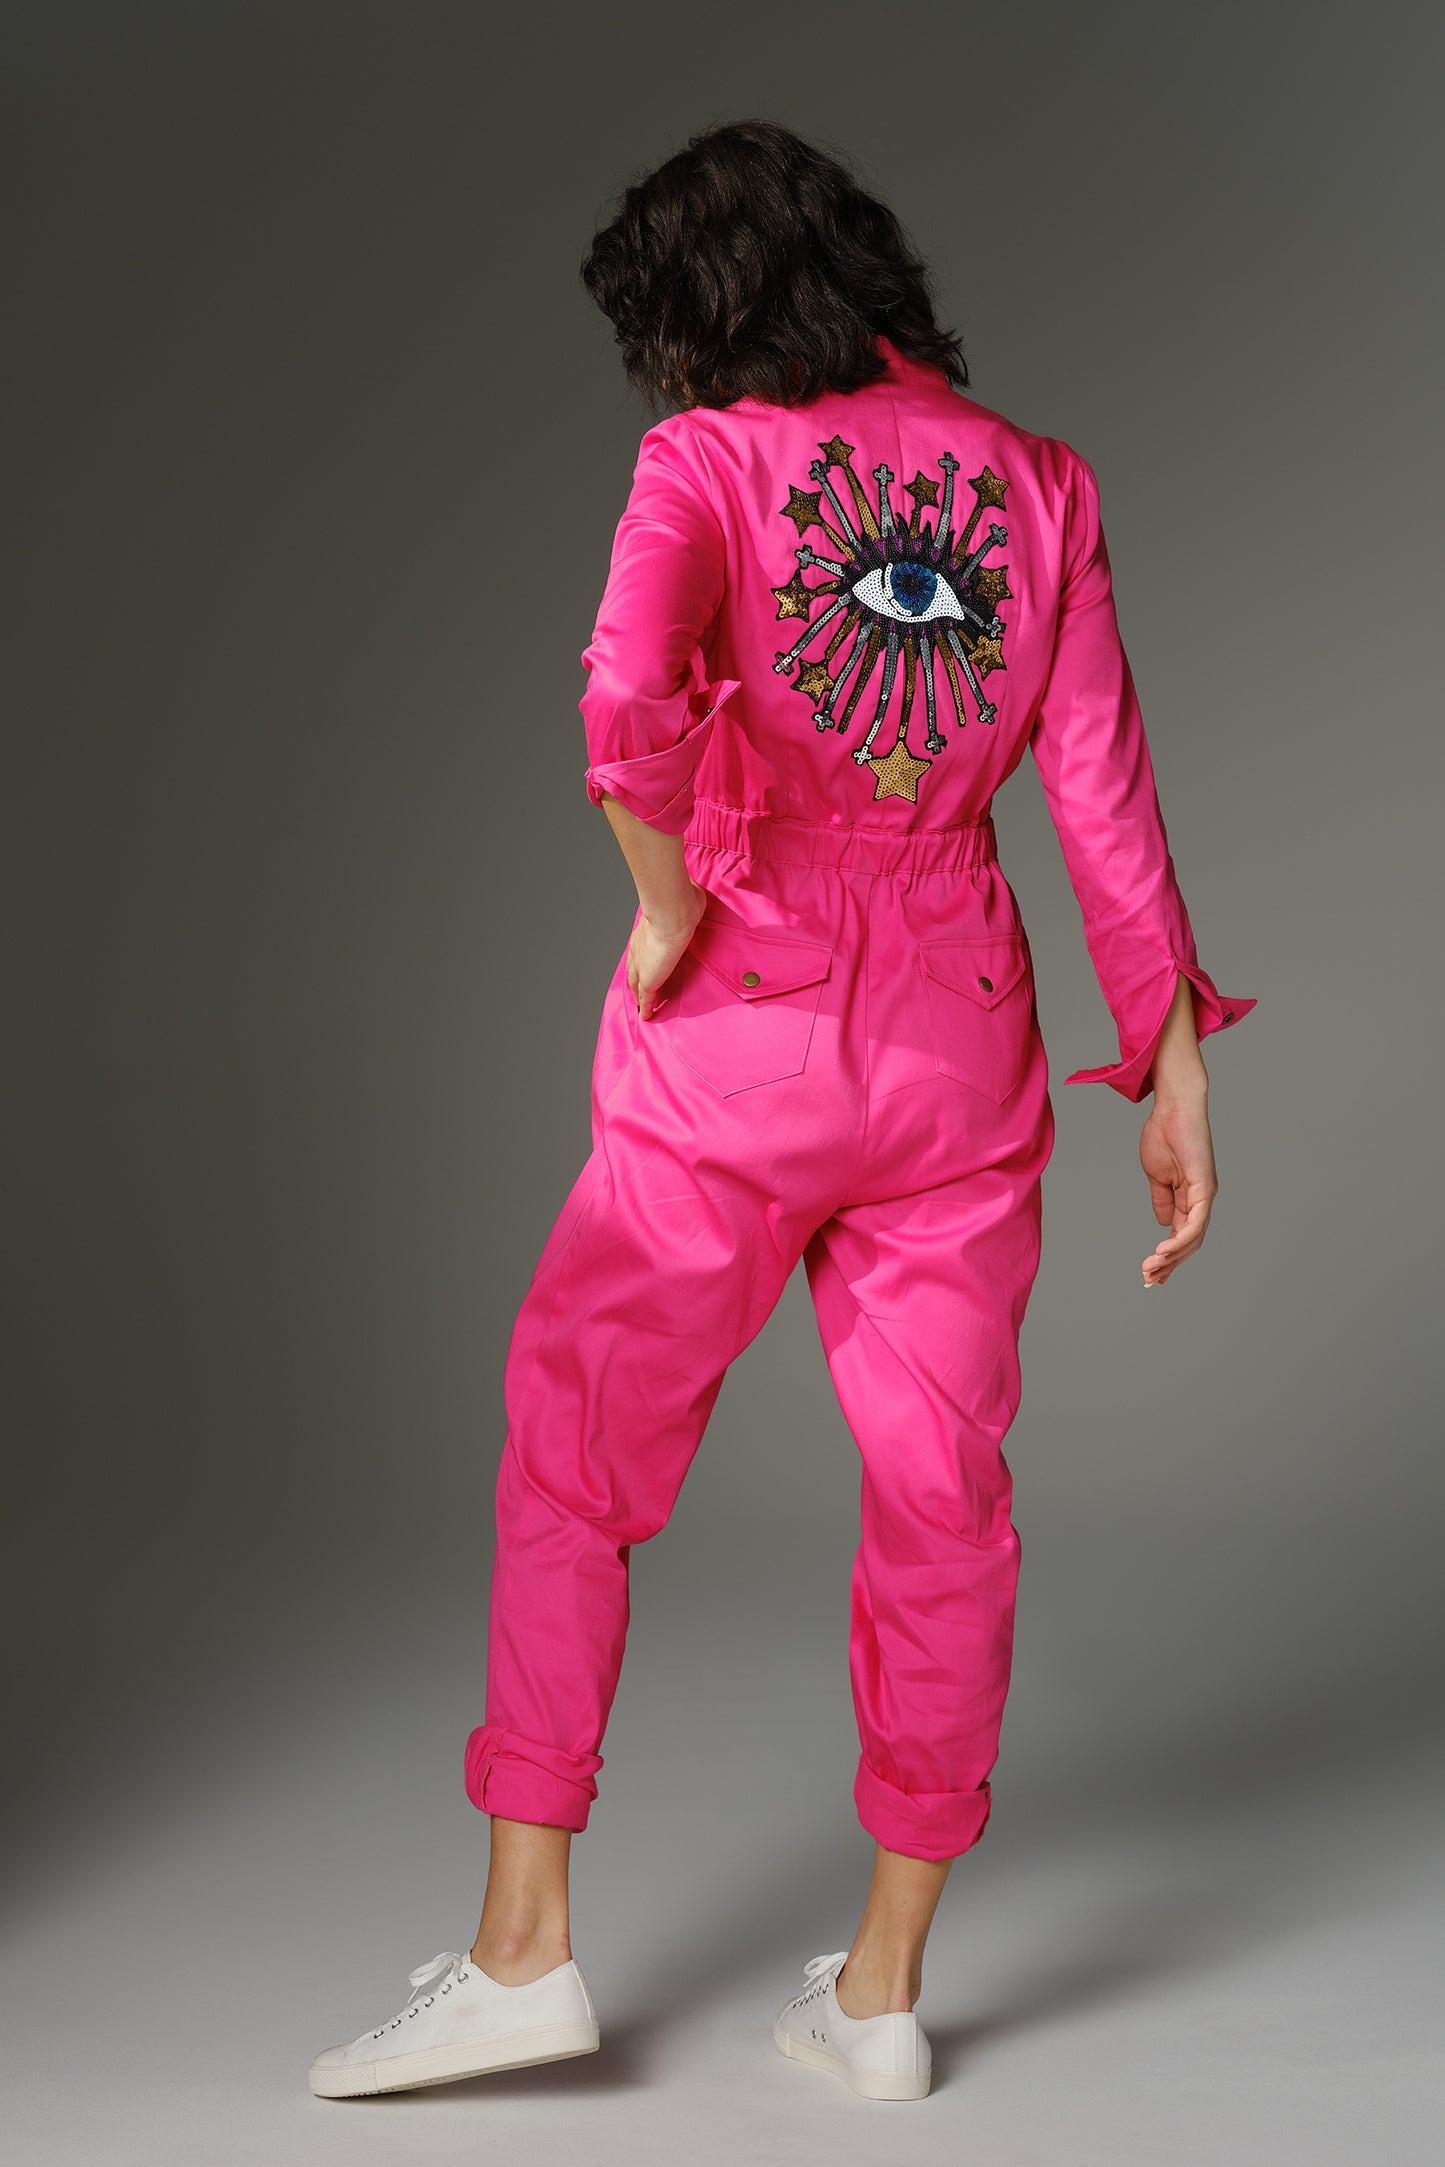 THE QUIMBY Jumpsuit - Long Sleeve Fuchsia with Sequin Eye Decal